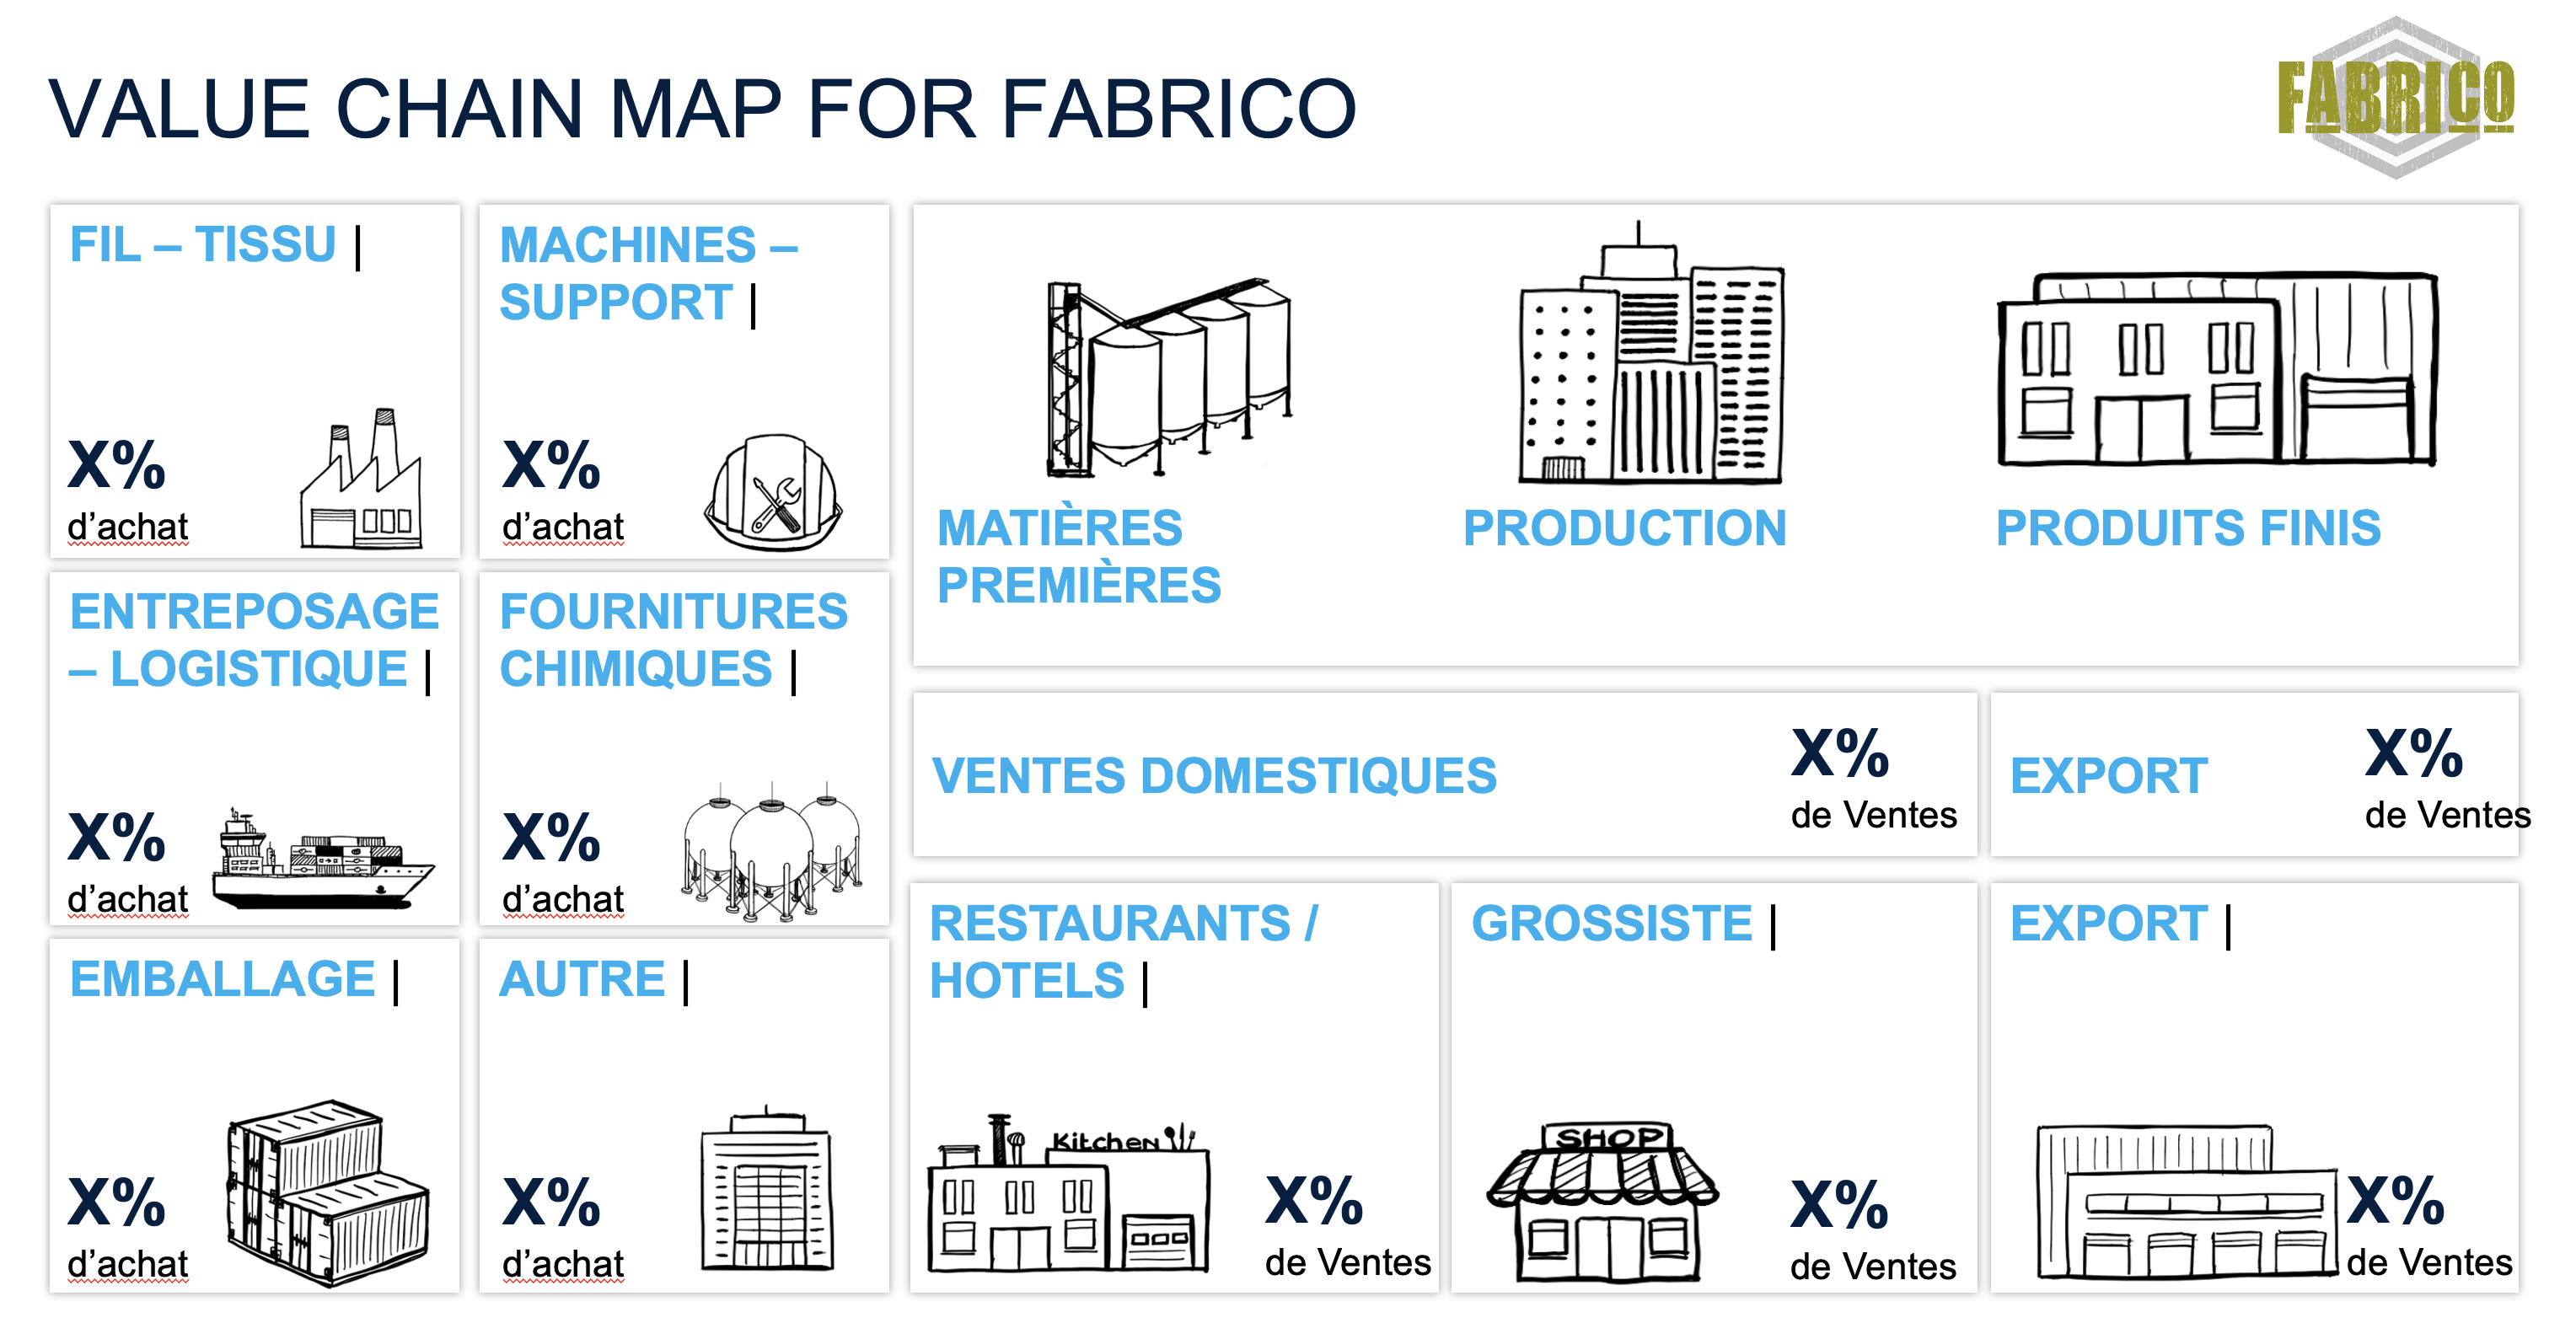 FabriCo Business Case | Value Chain Map